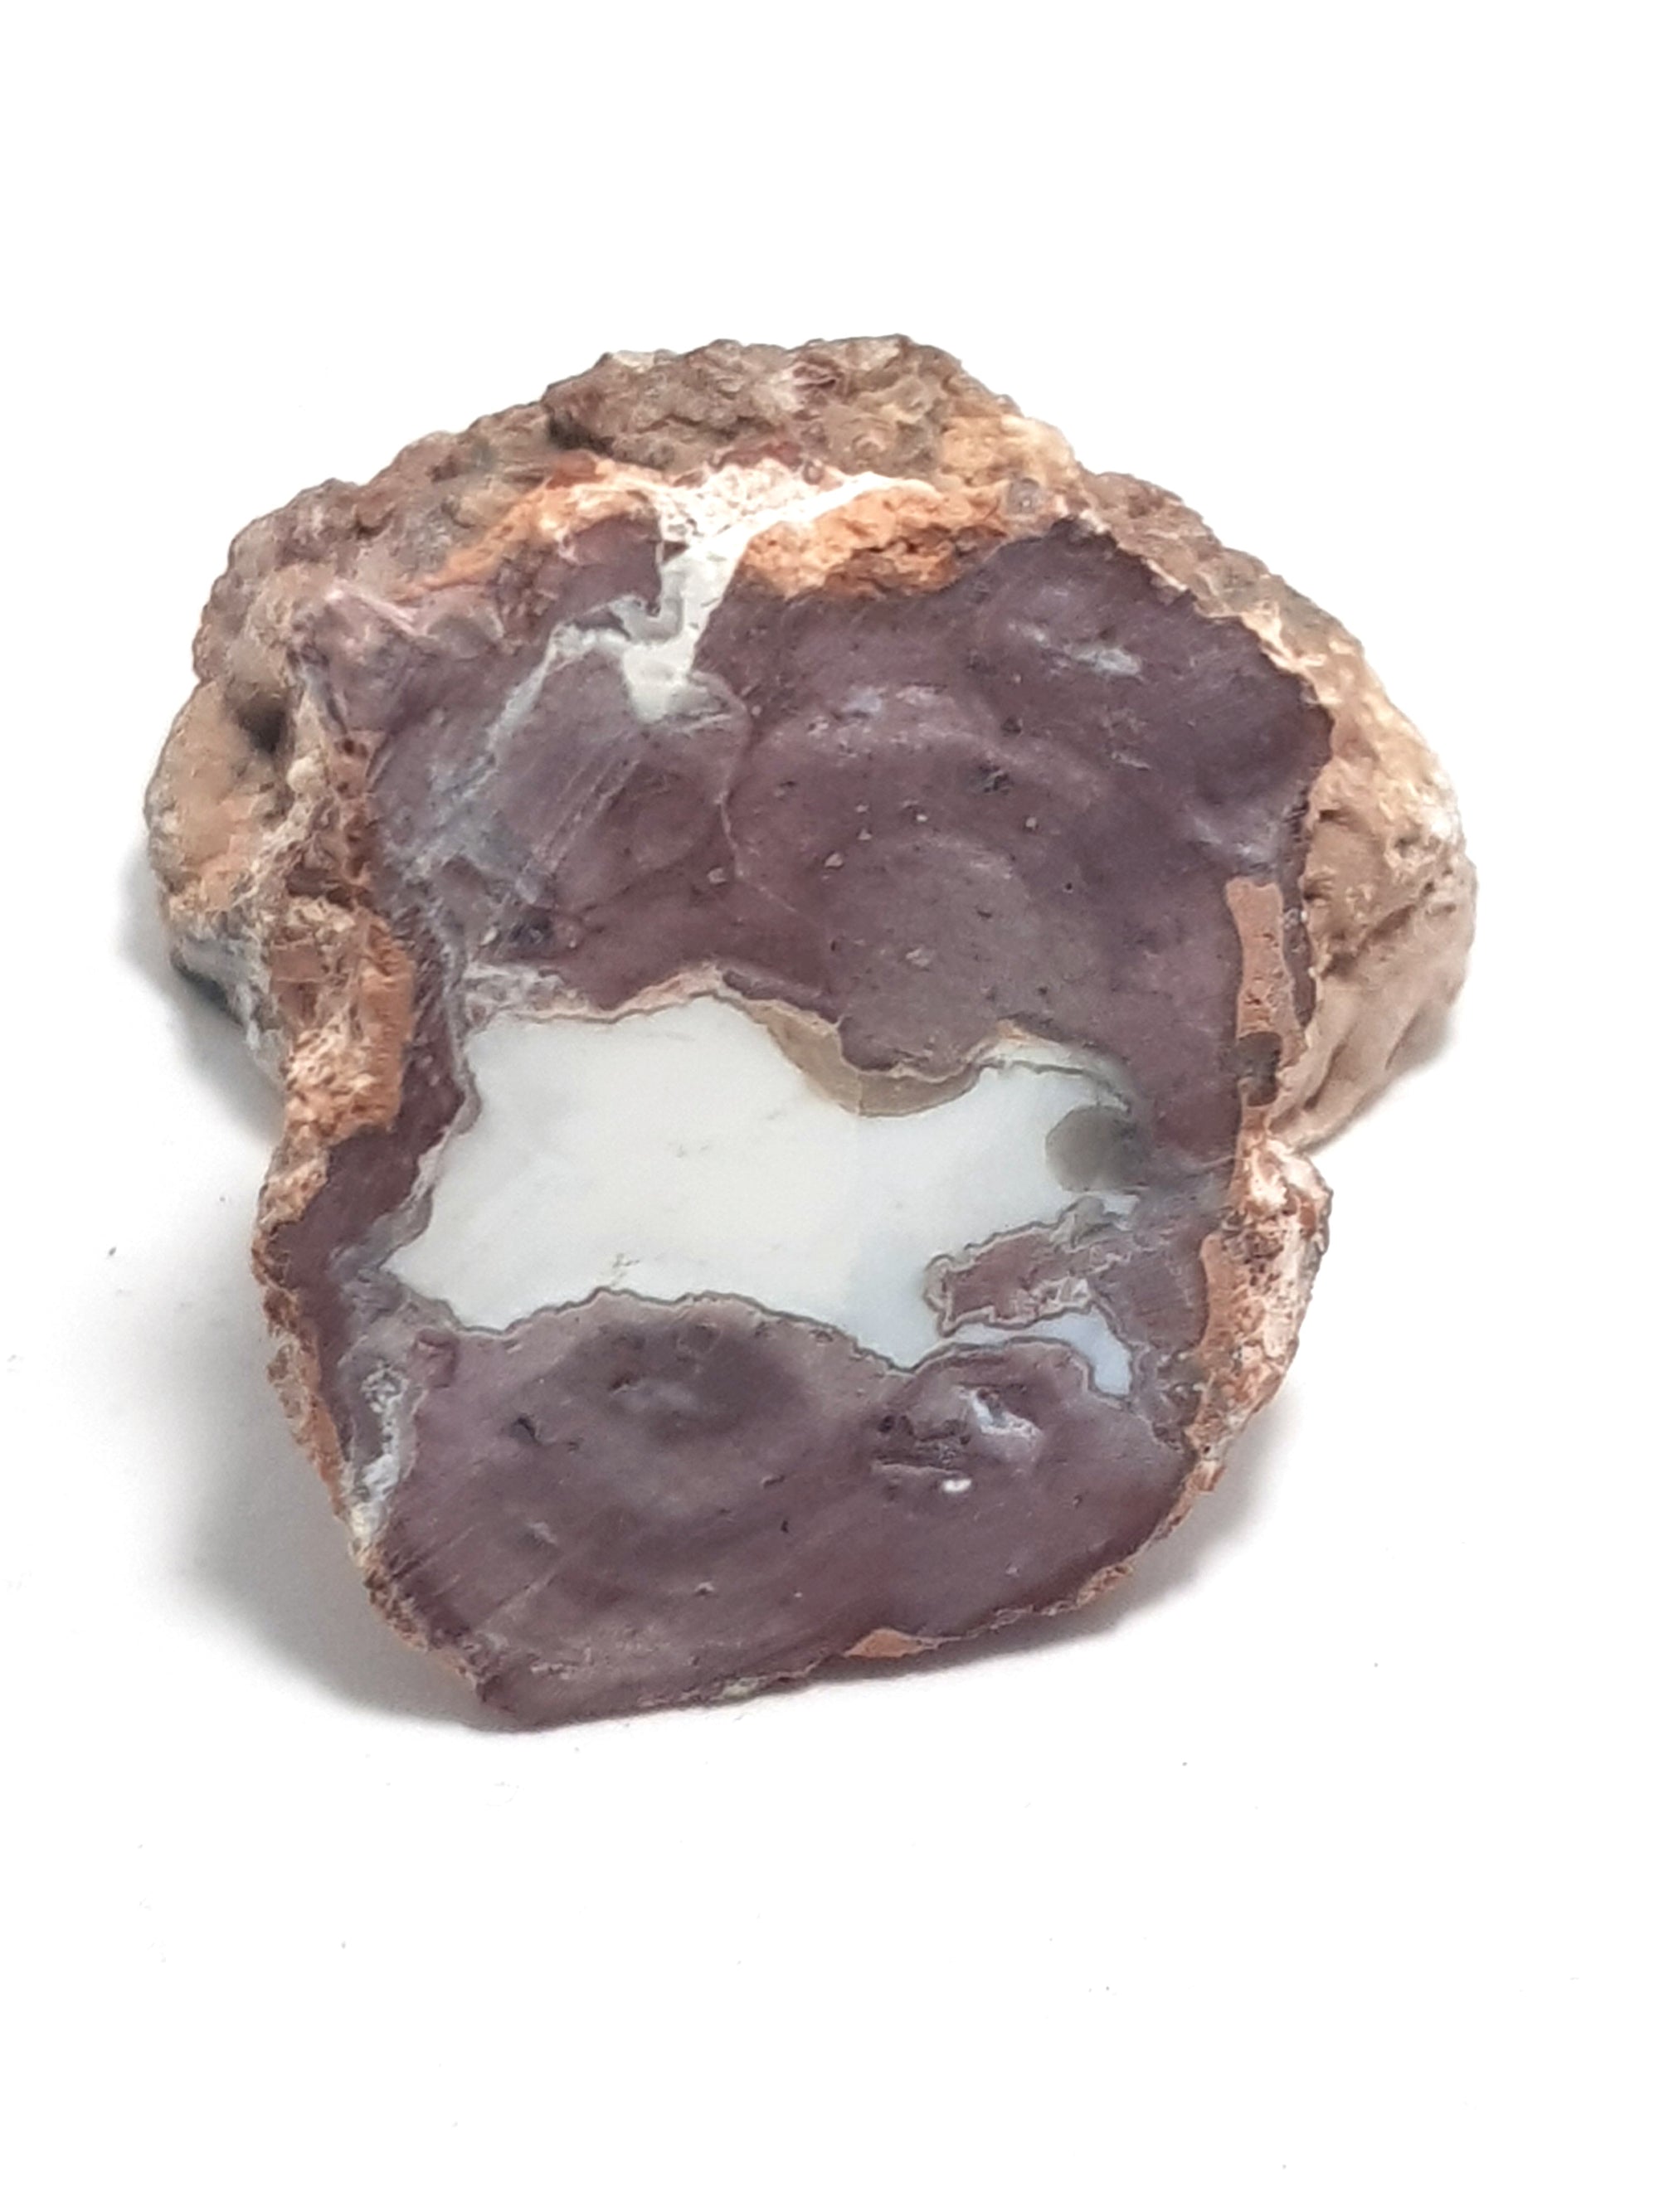 an agate geode cut in half and semi polished. The exterior of the geode is rough, the sliced interior is banded. the outer layers look bubbly and are mauve. The centre of the slice is white.